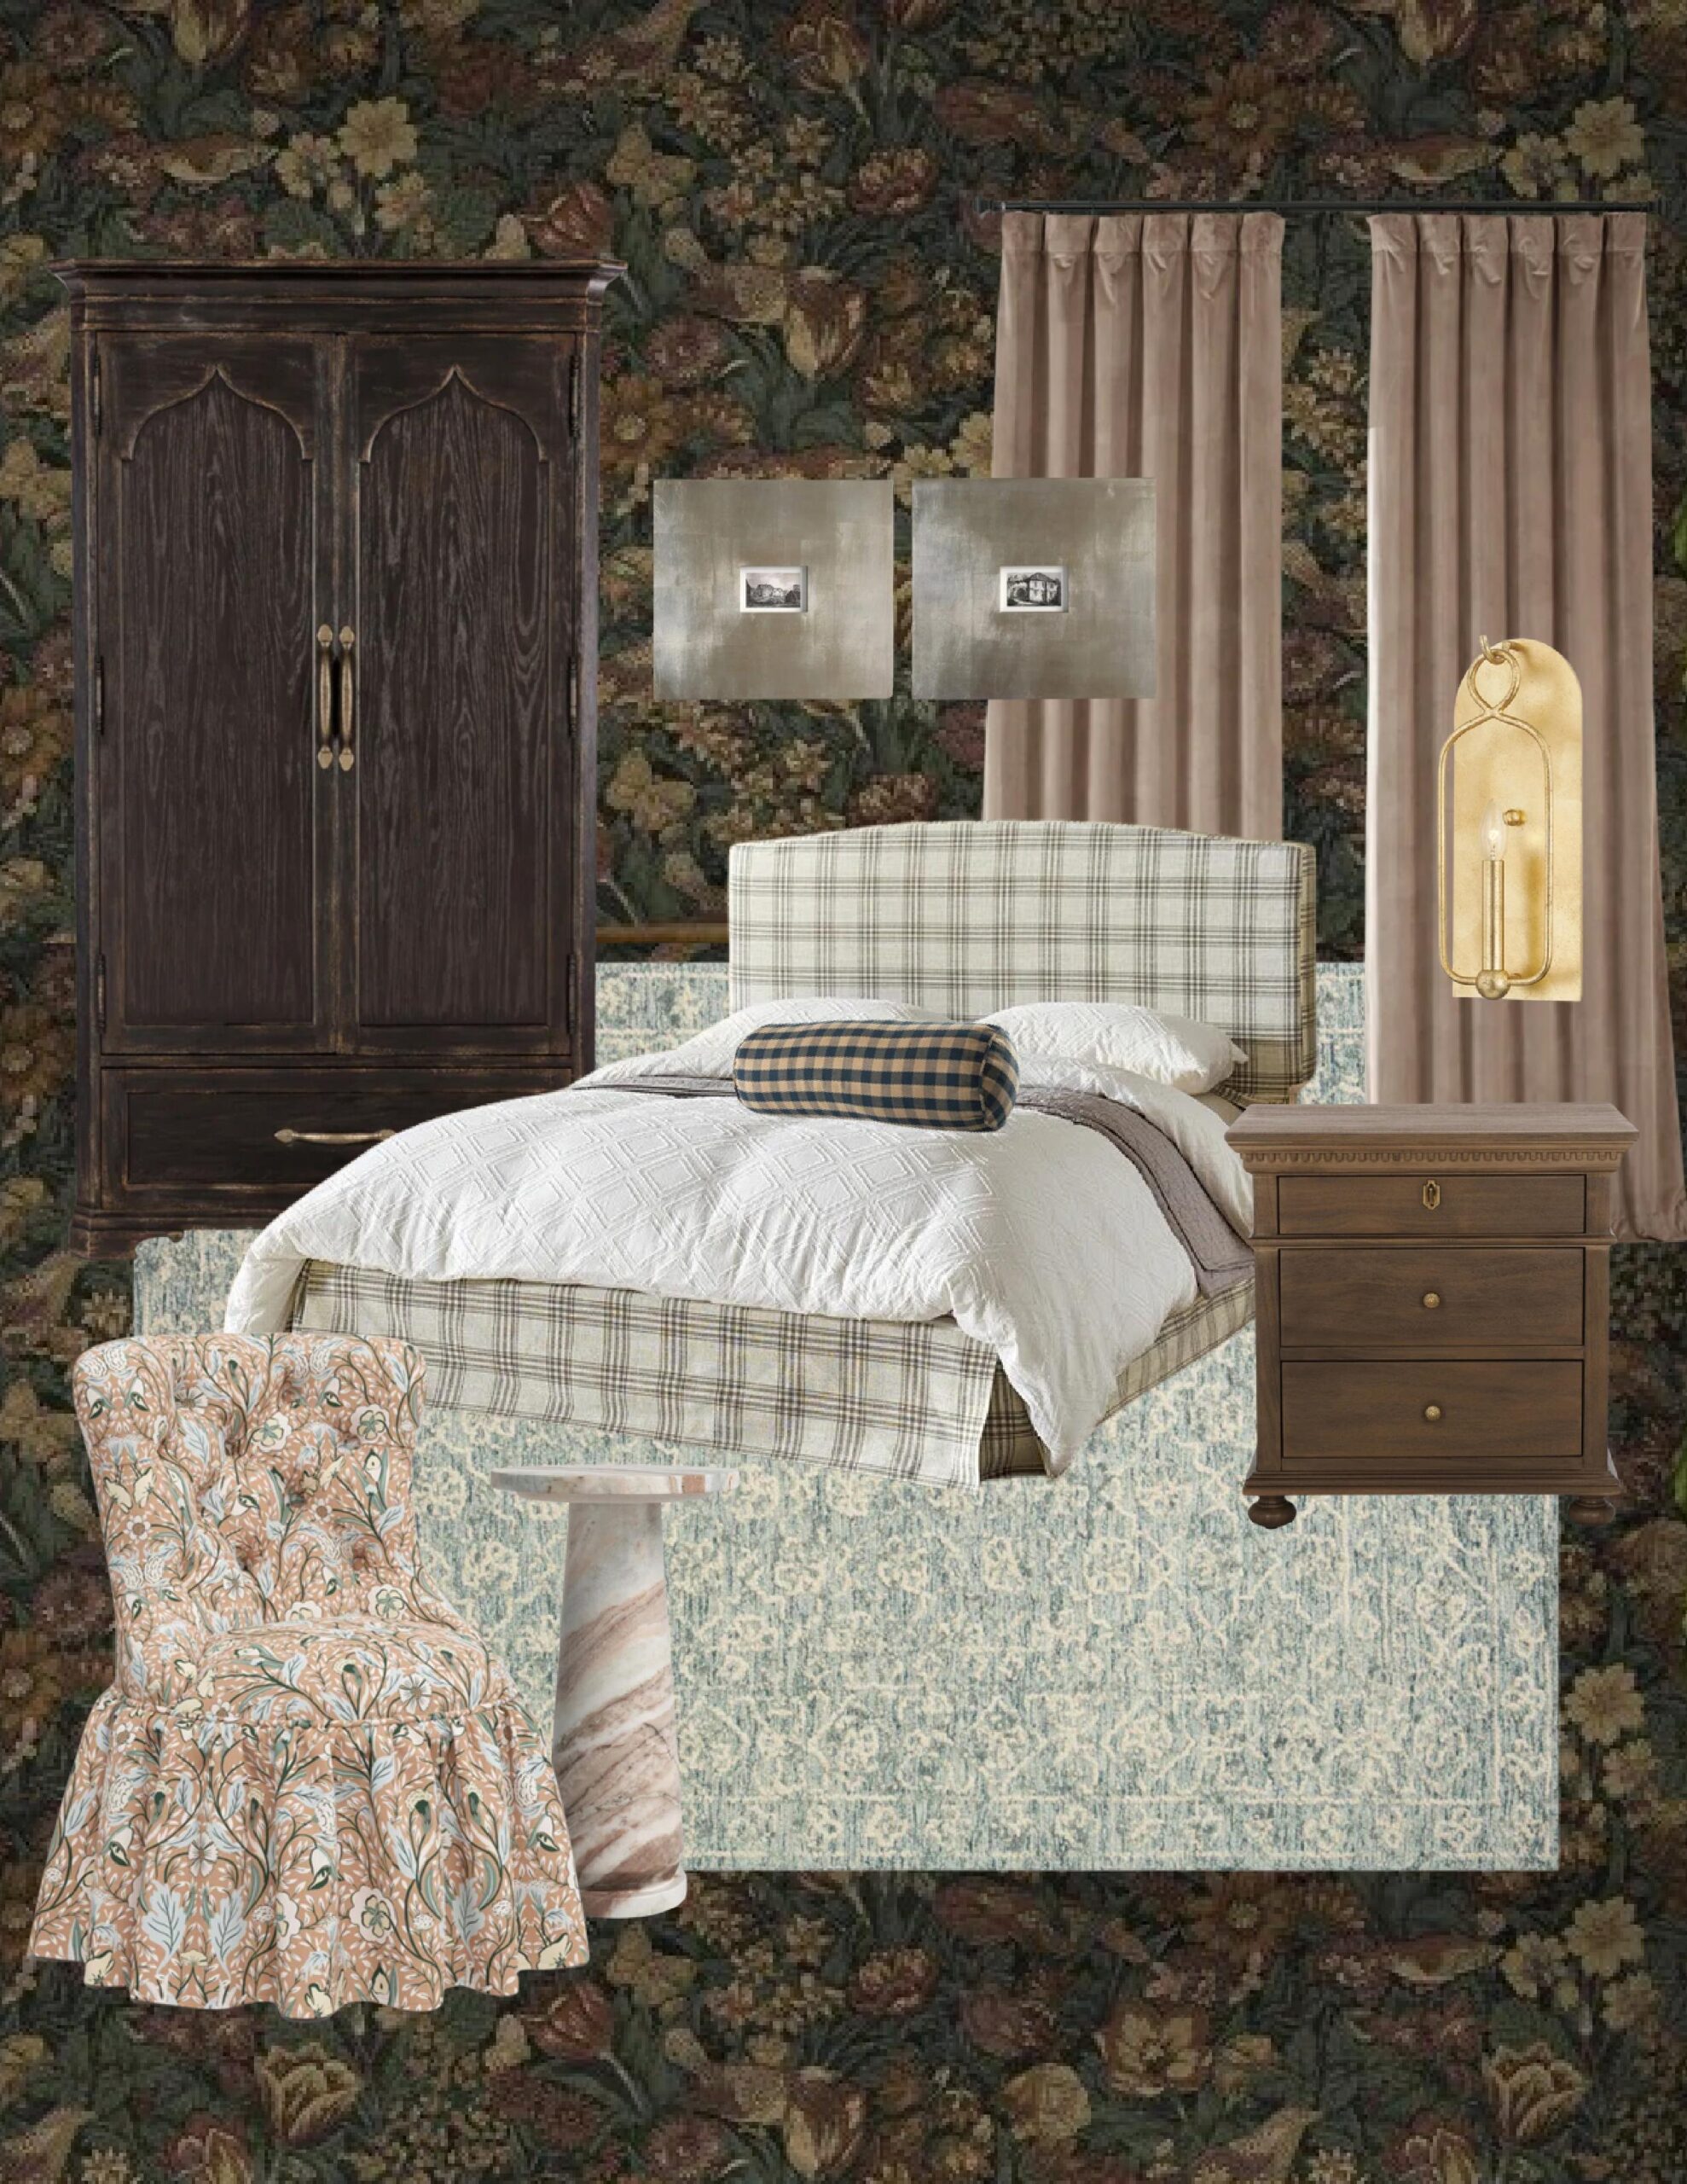 Bedroom mood board with pattern drenching. Floral wallpaper, plaid bed frame, wood armoire, and a floral skirted chair.